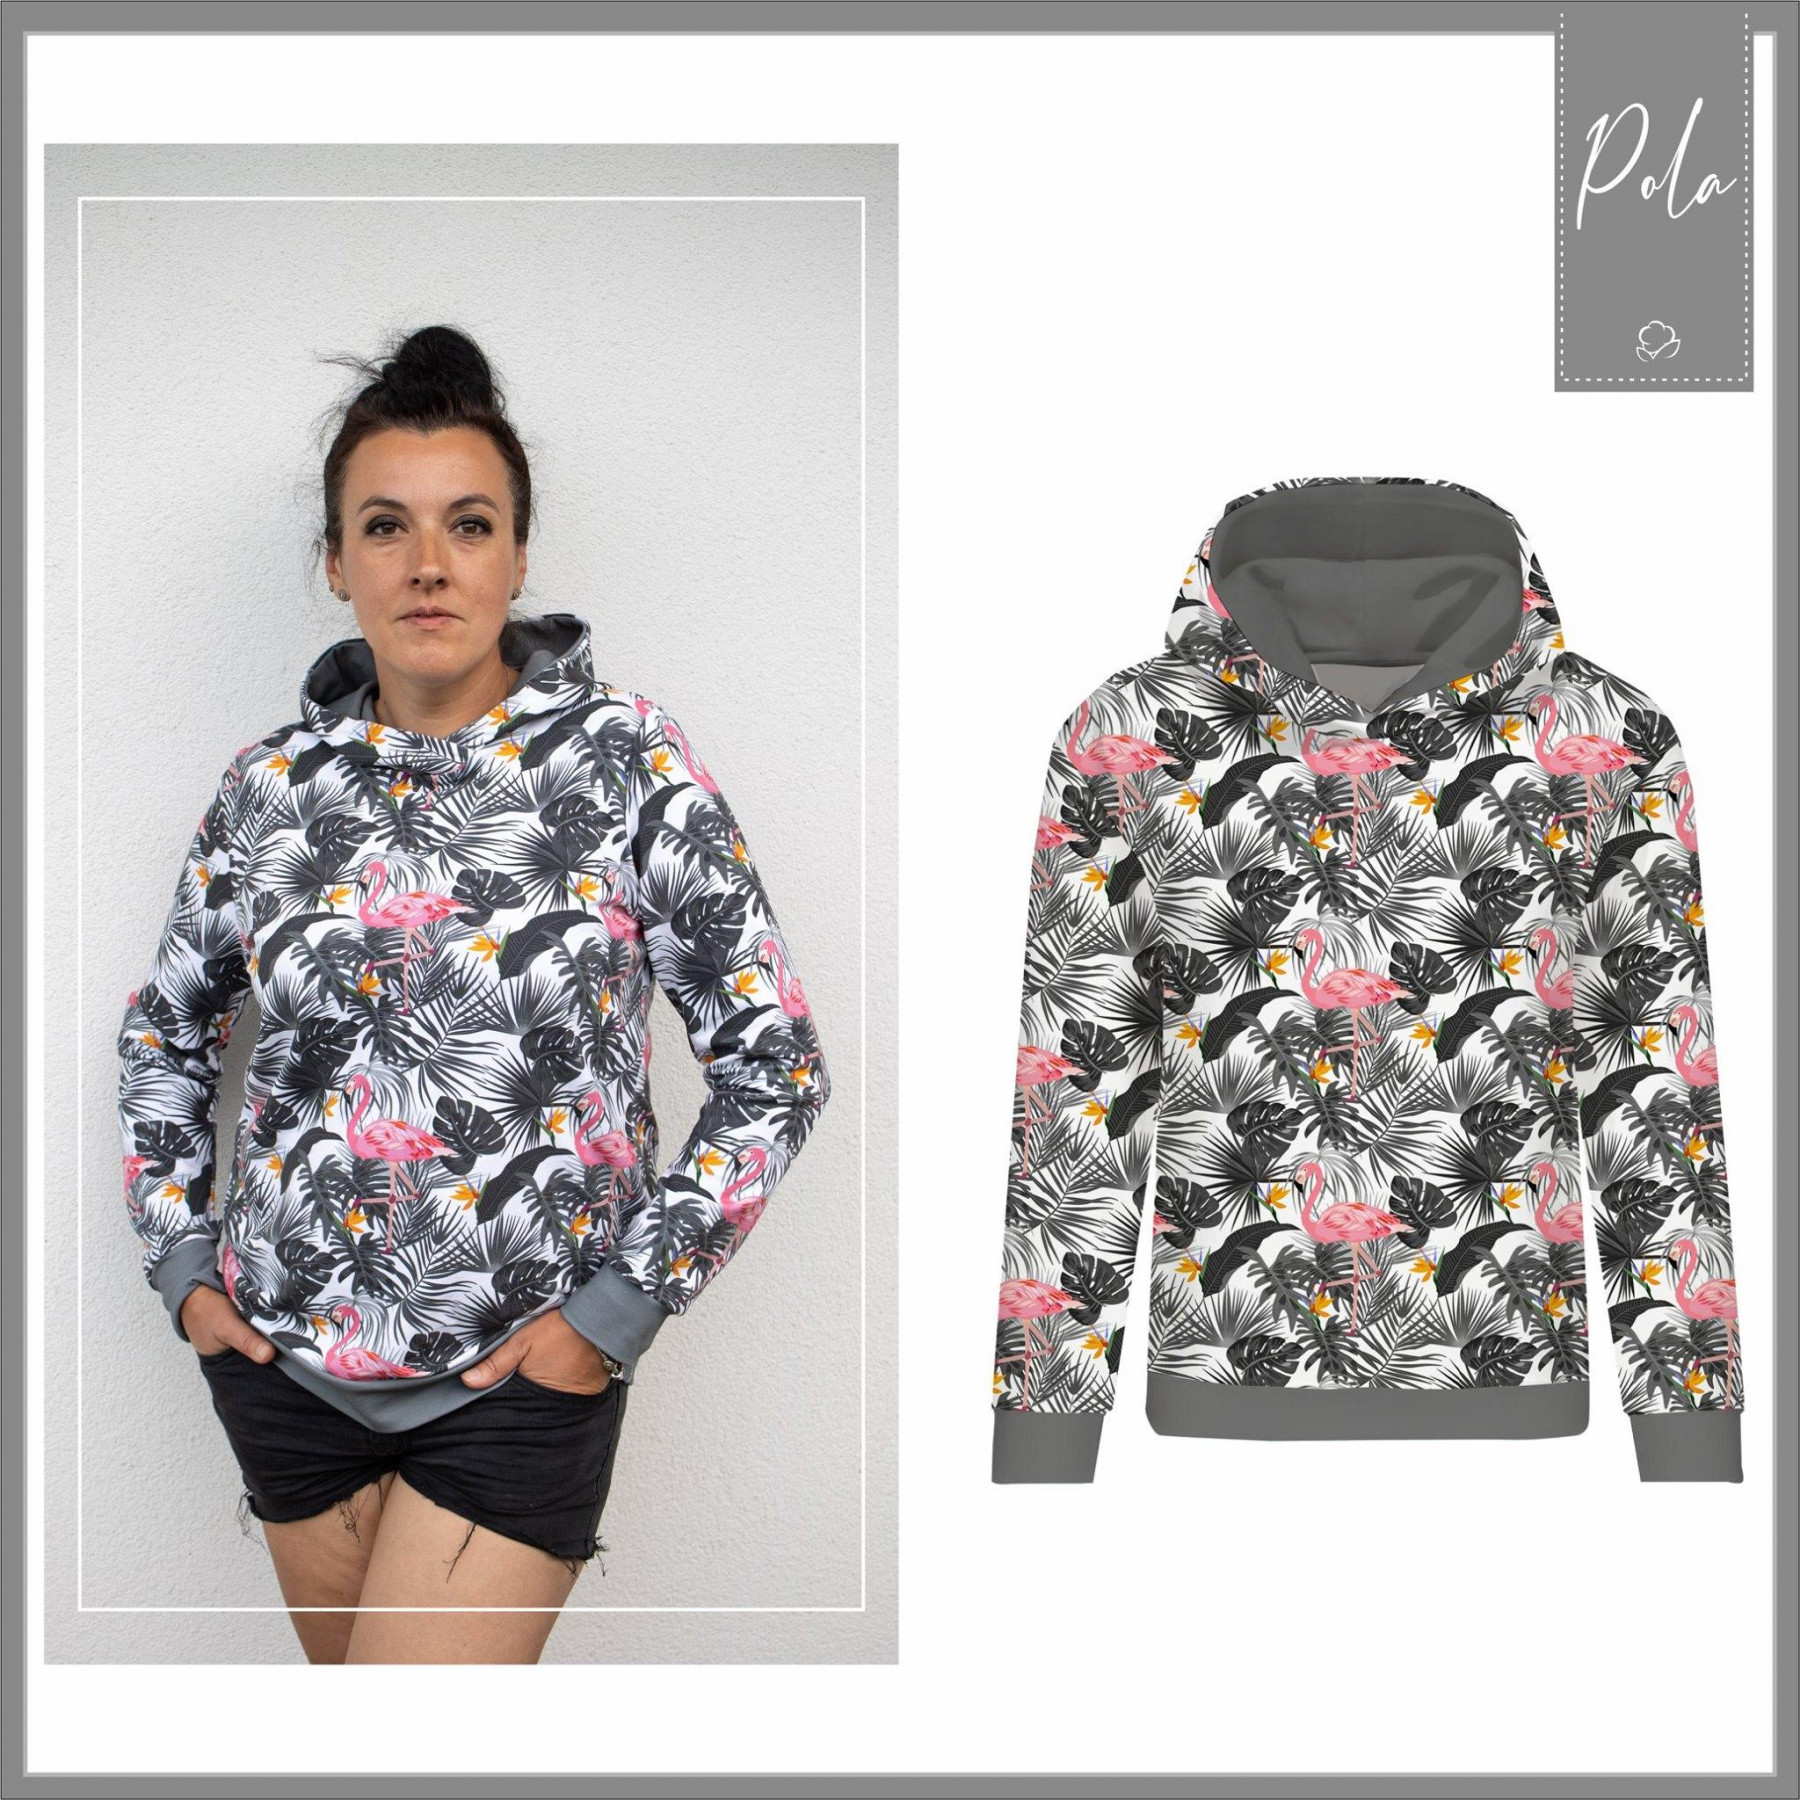 CLASSIC WOMEN’S HOODIE (POLA) - COMIC BOOK (colorful) - looped knit fabric 